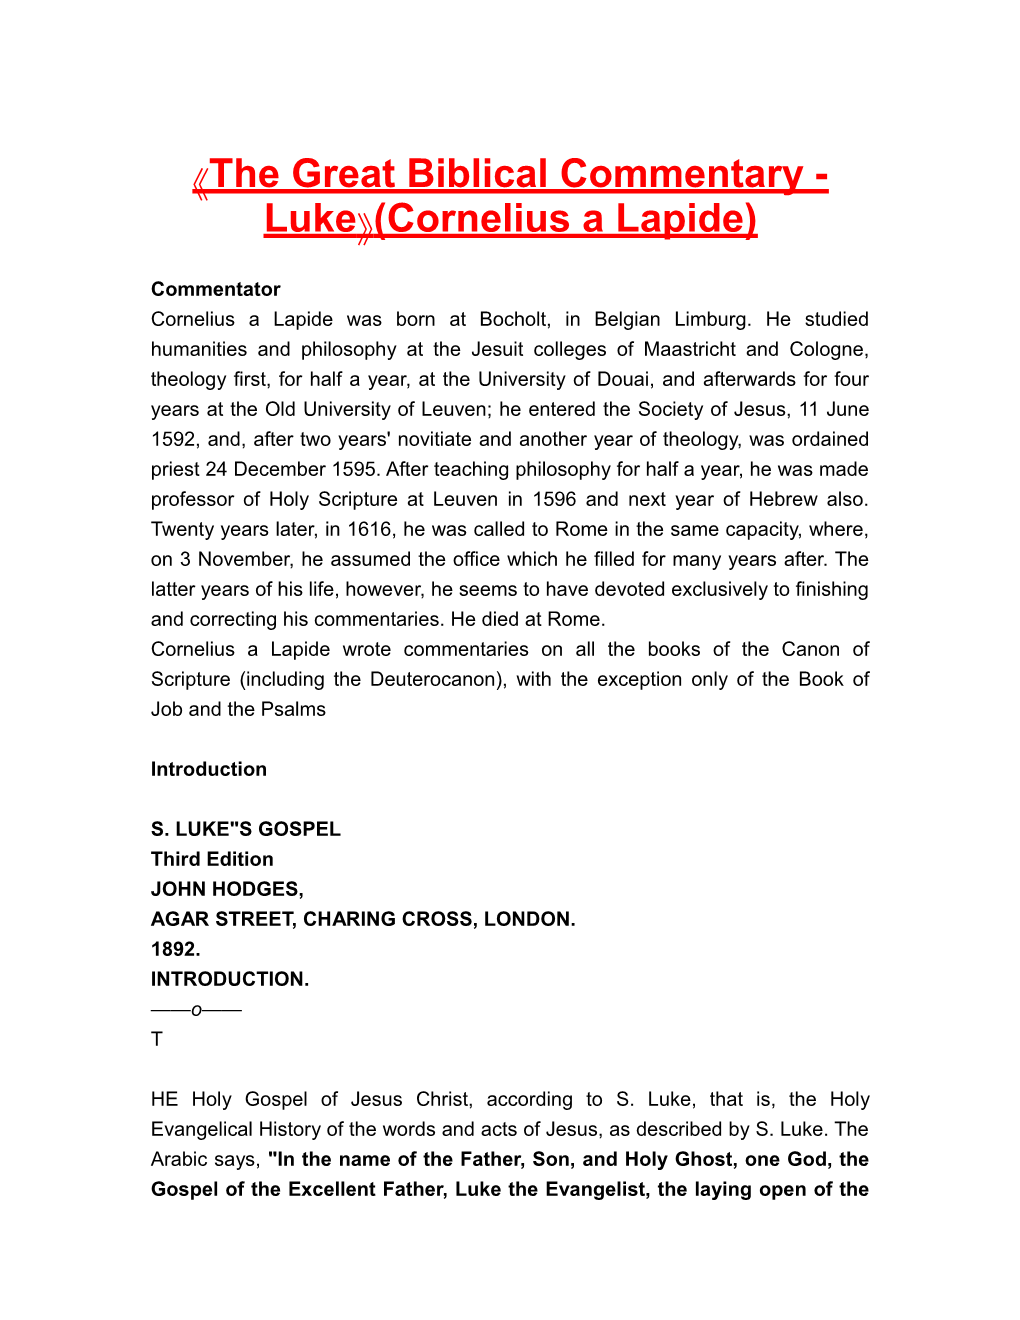 The Great Biblical Commentary - Luke (Cornelius Alapide)